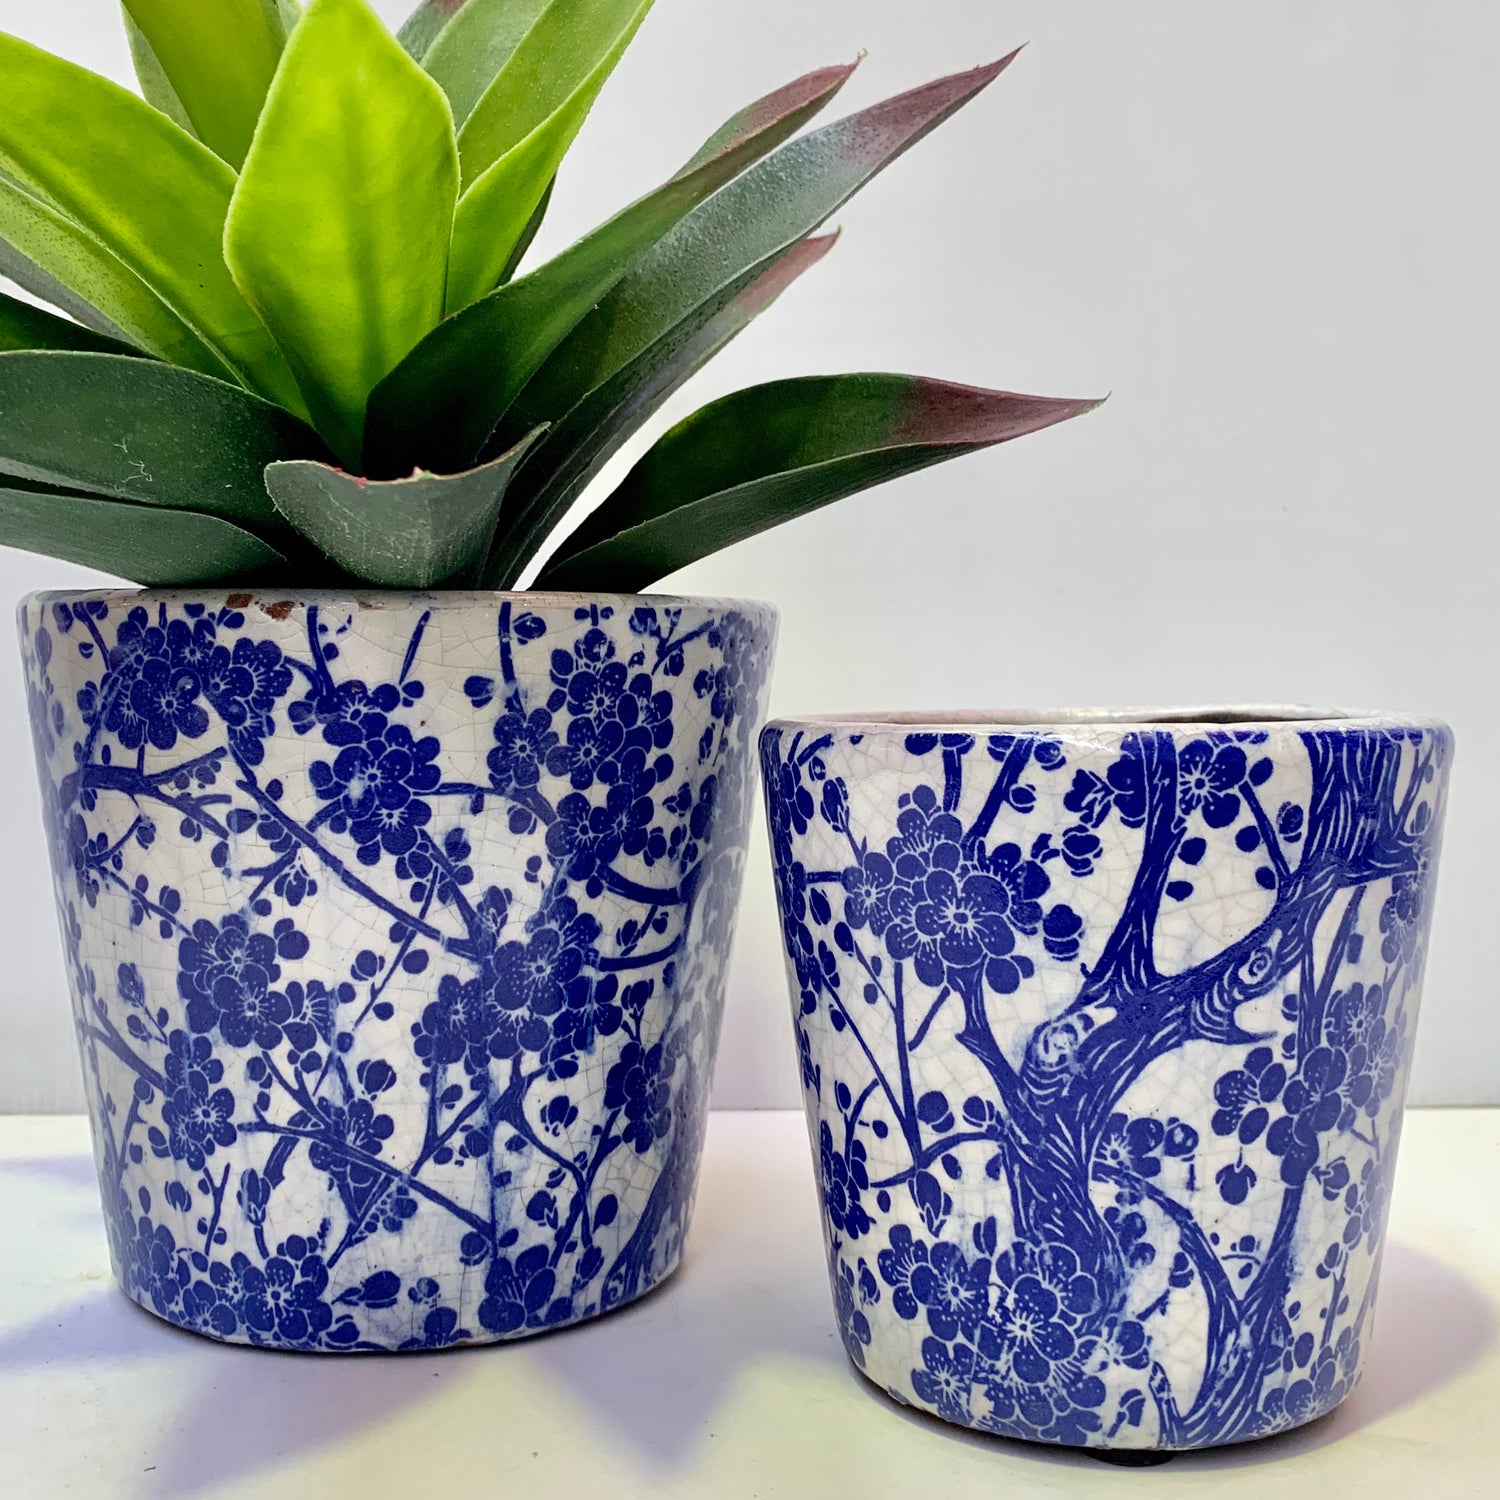 Rustic Round Pots - Blue Blooms